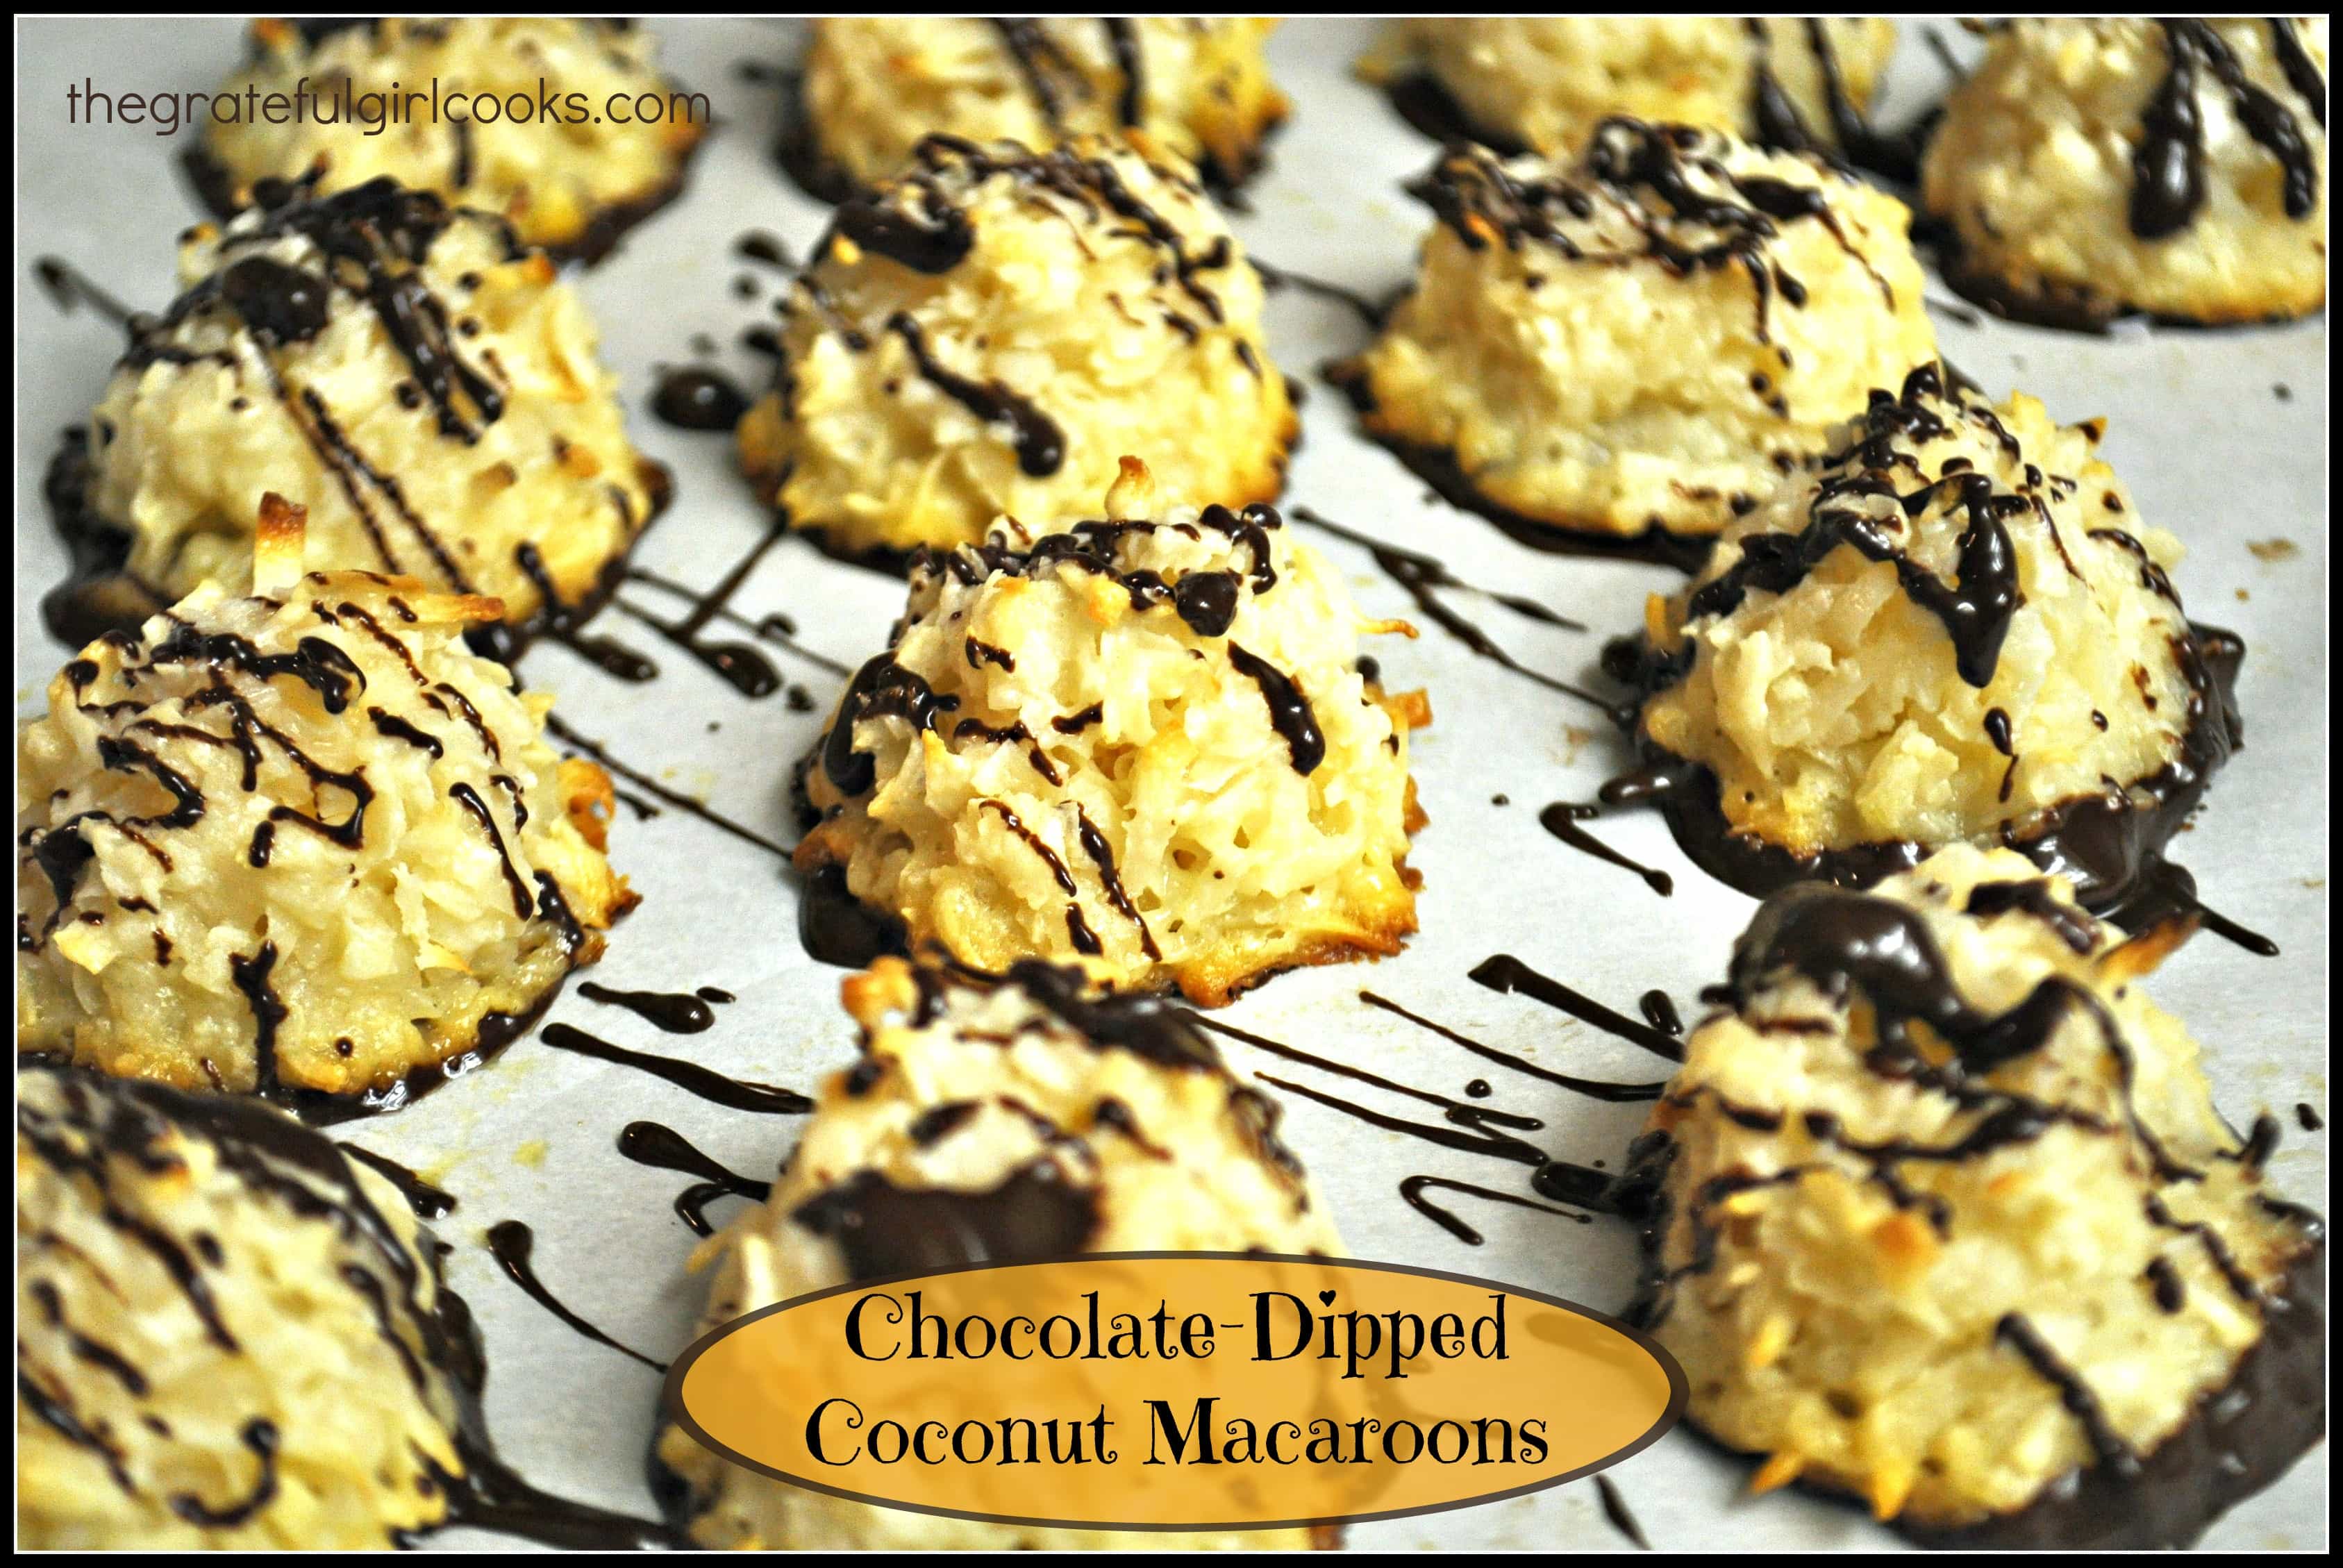 Chocolate-Dipped Coconut Macaroons1